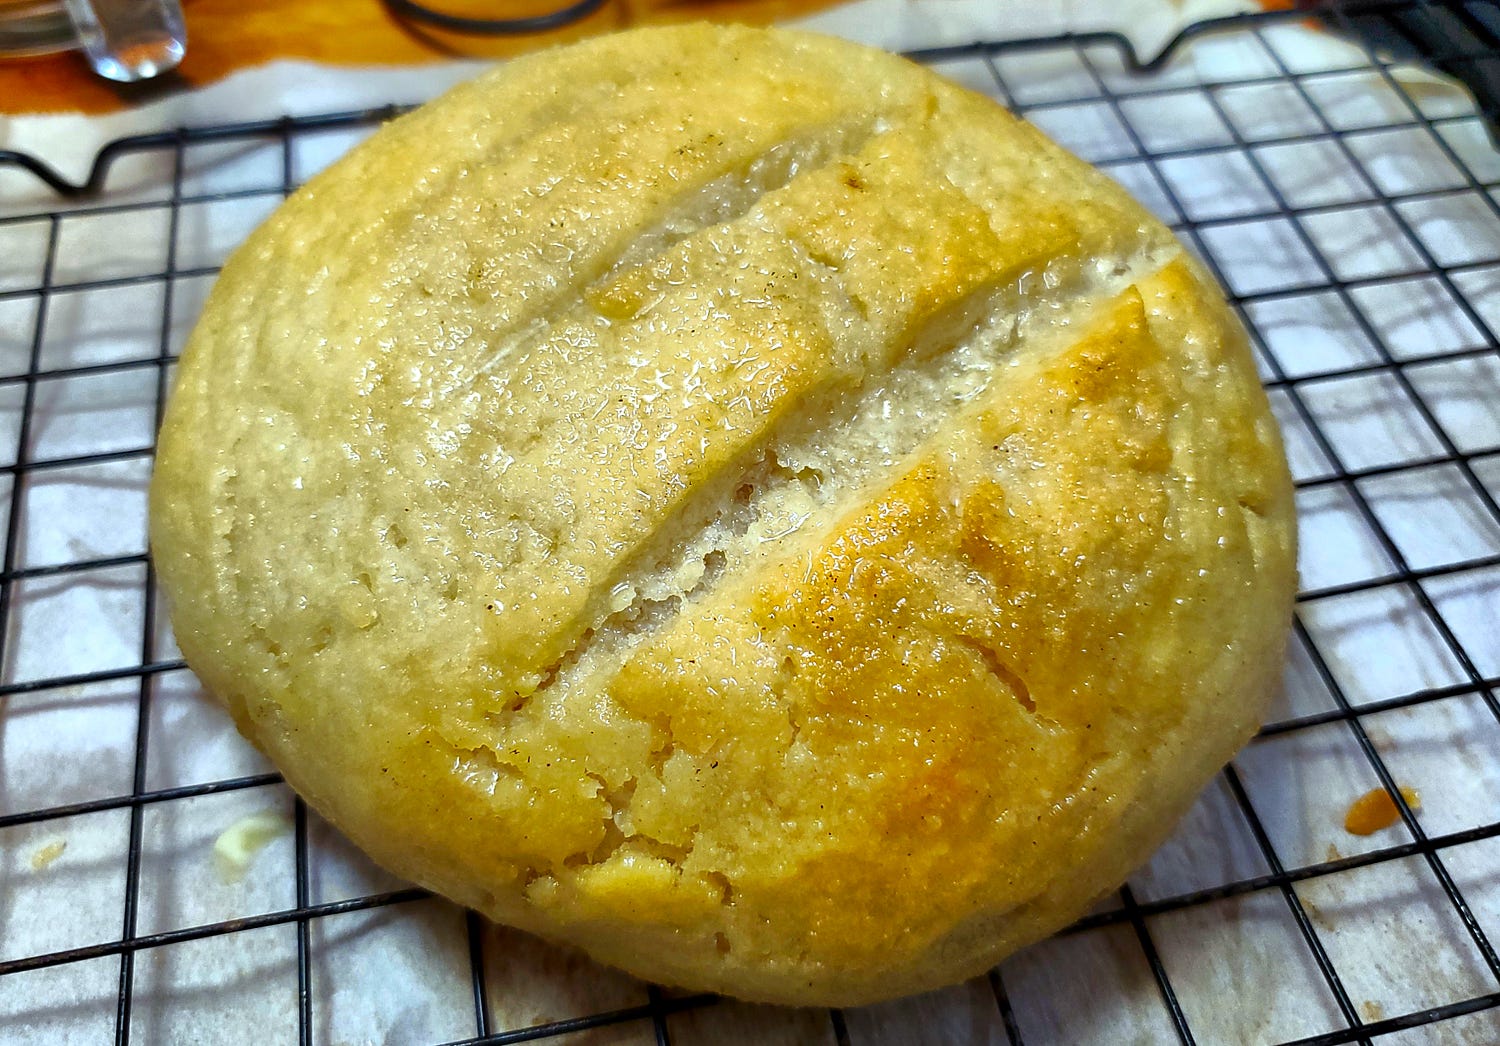 A round loaf of bread with three slits on the top is sitting on a baking rack cooking over a piece of parchment paper.